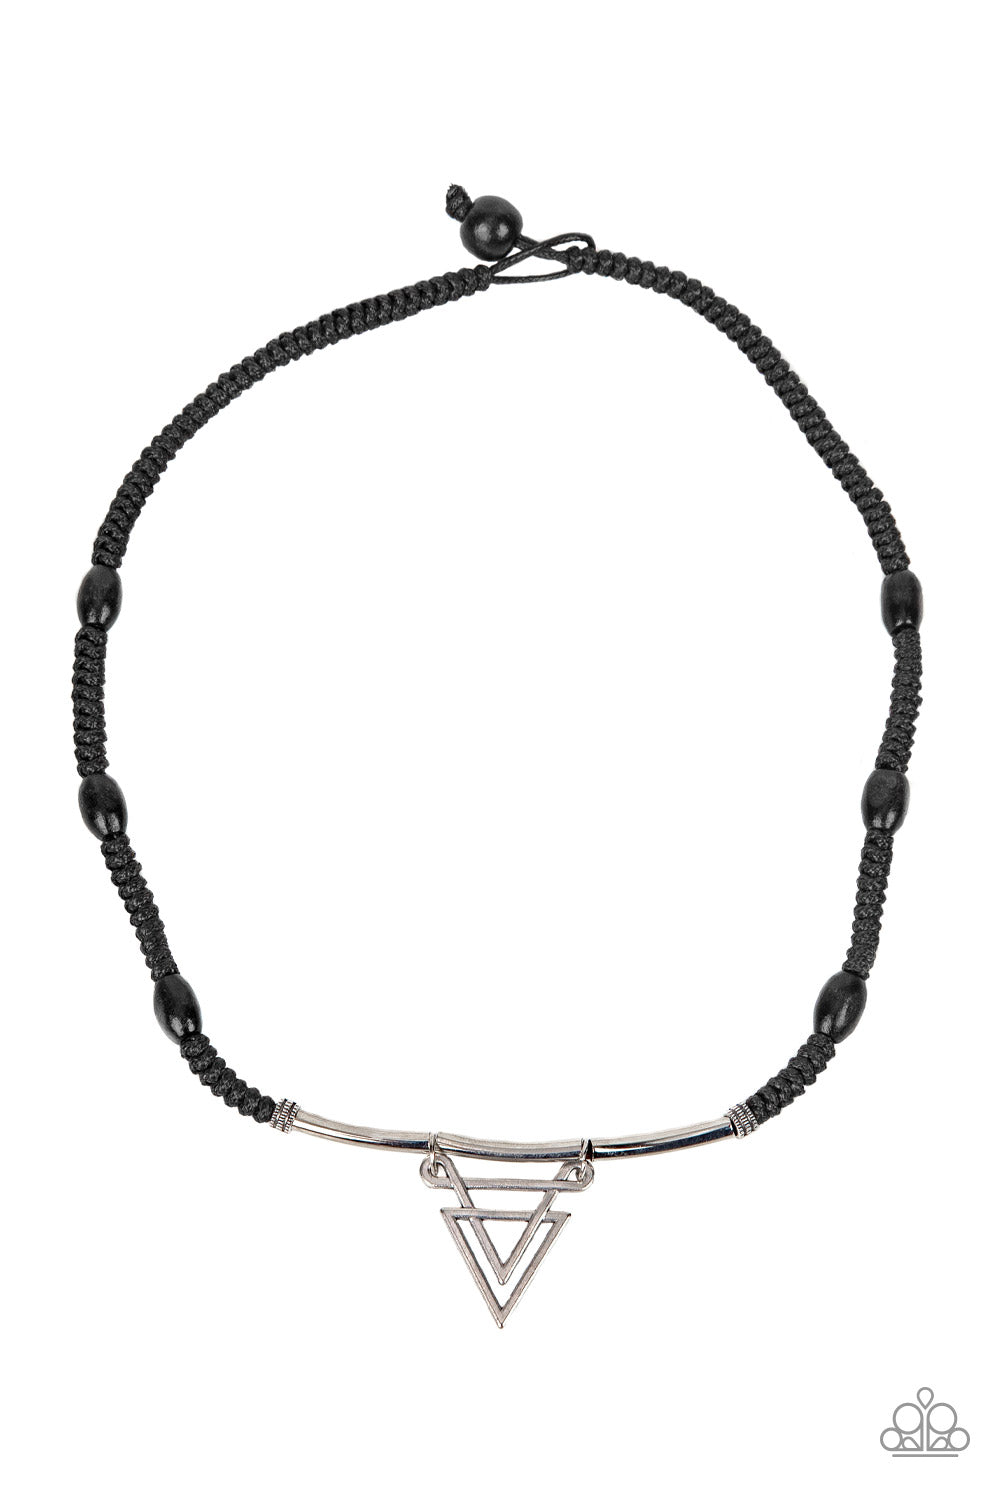 Arrowed Admiral - Black Urban Necklace - Paparazzi Accessories - Black wooden beads are knotted in place along a braided black cord below the collar. Infused with silver rod-like beads, an ornately stacked silver triangular pendant swings from the center for a sharp finish.